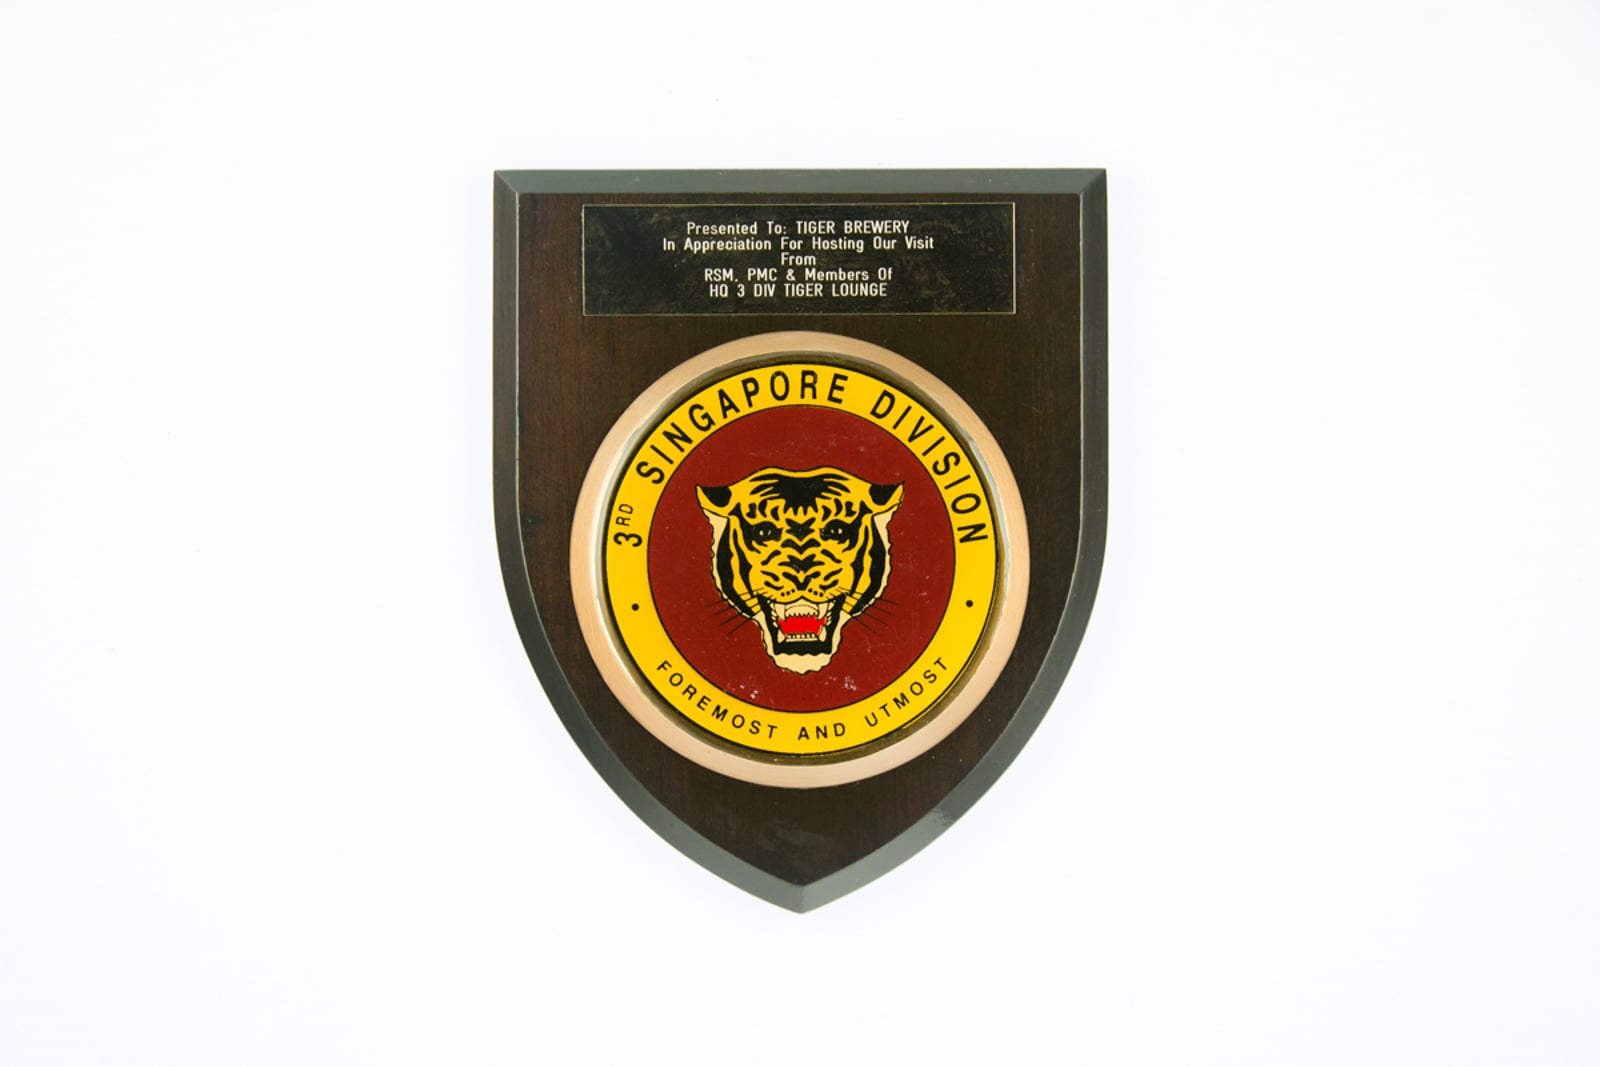 3rd Singapore Division Foremost and Utmost Plaque